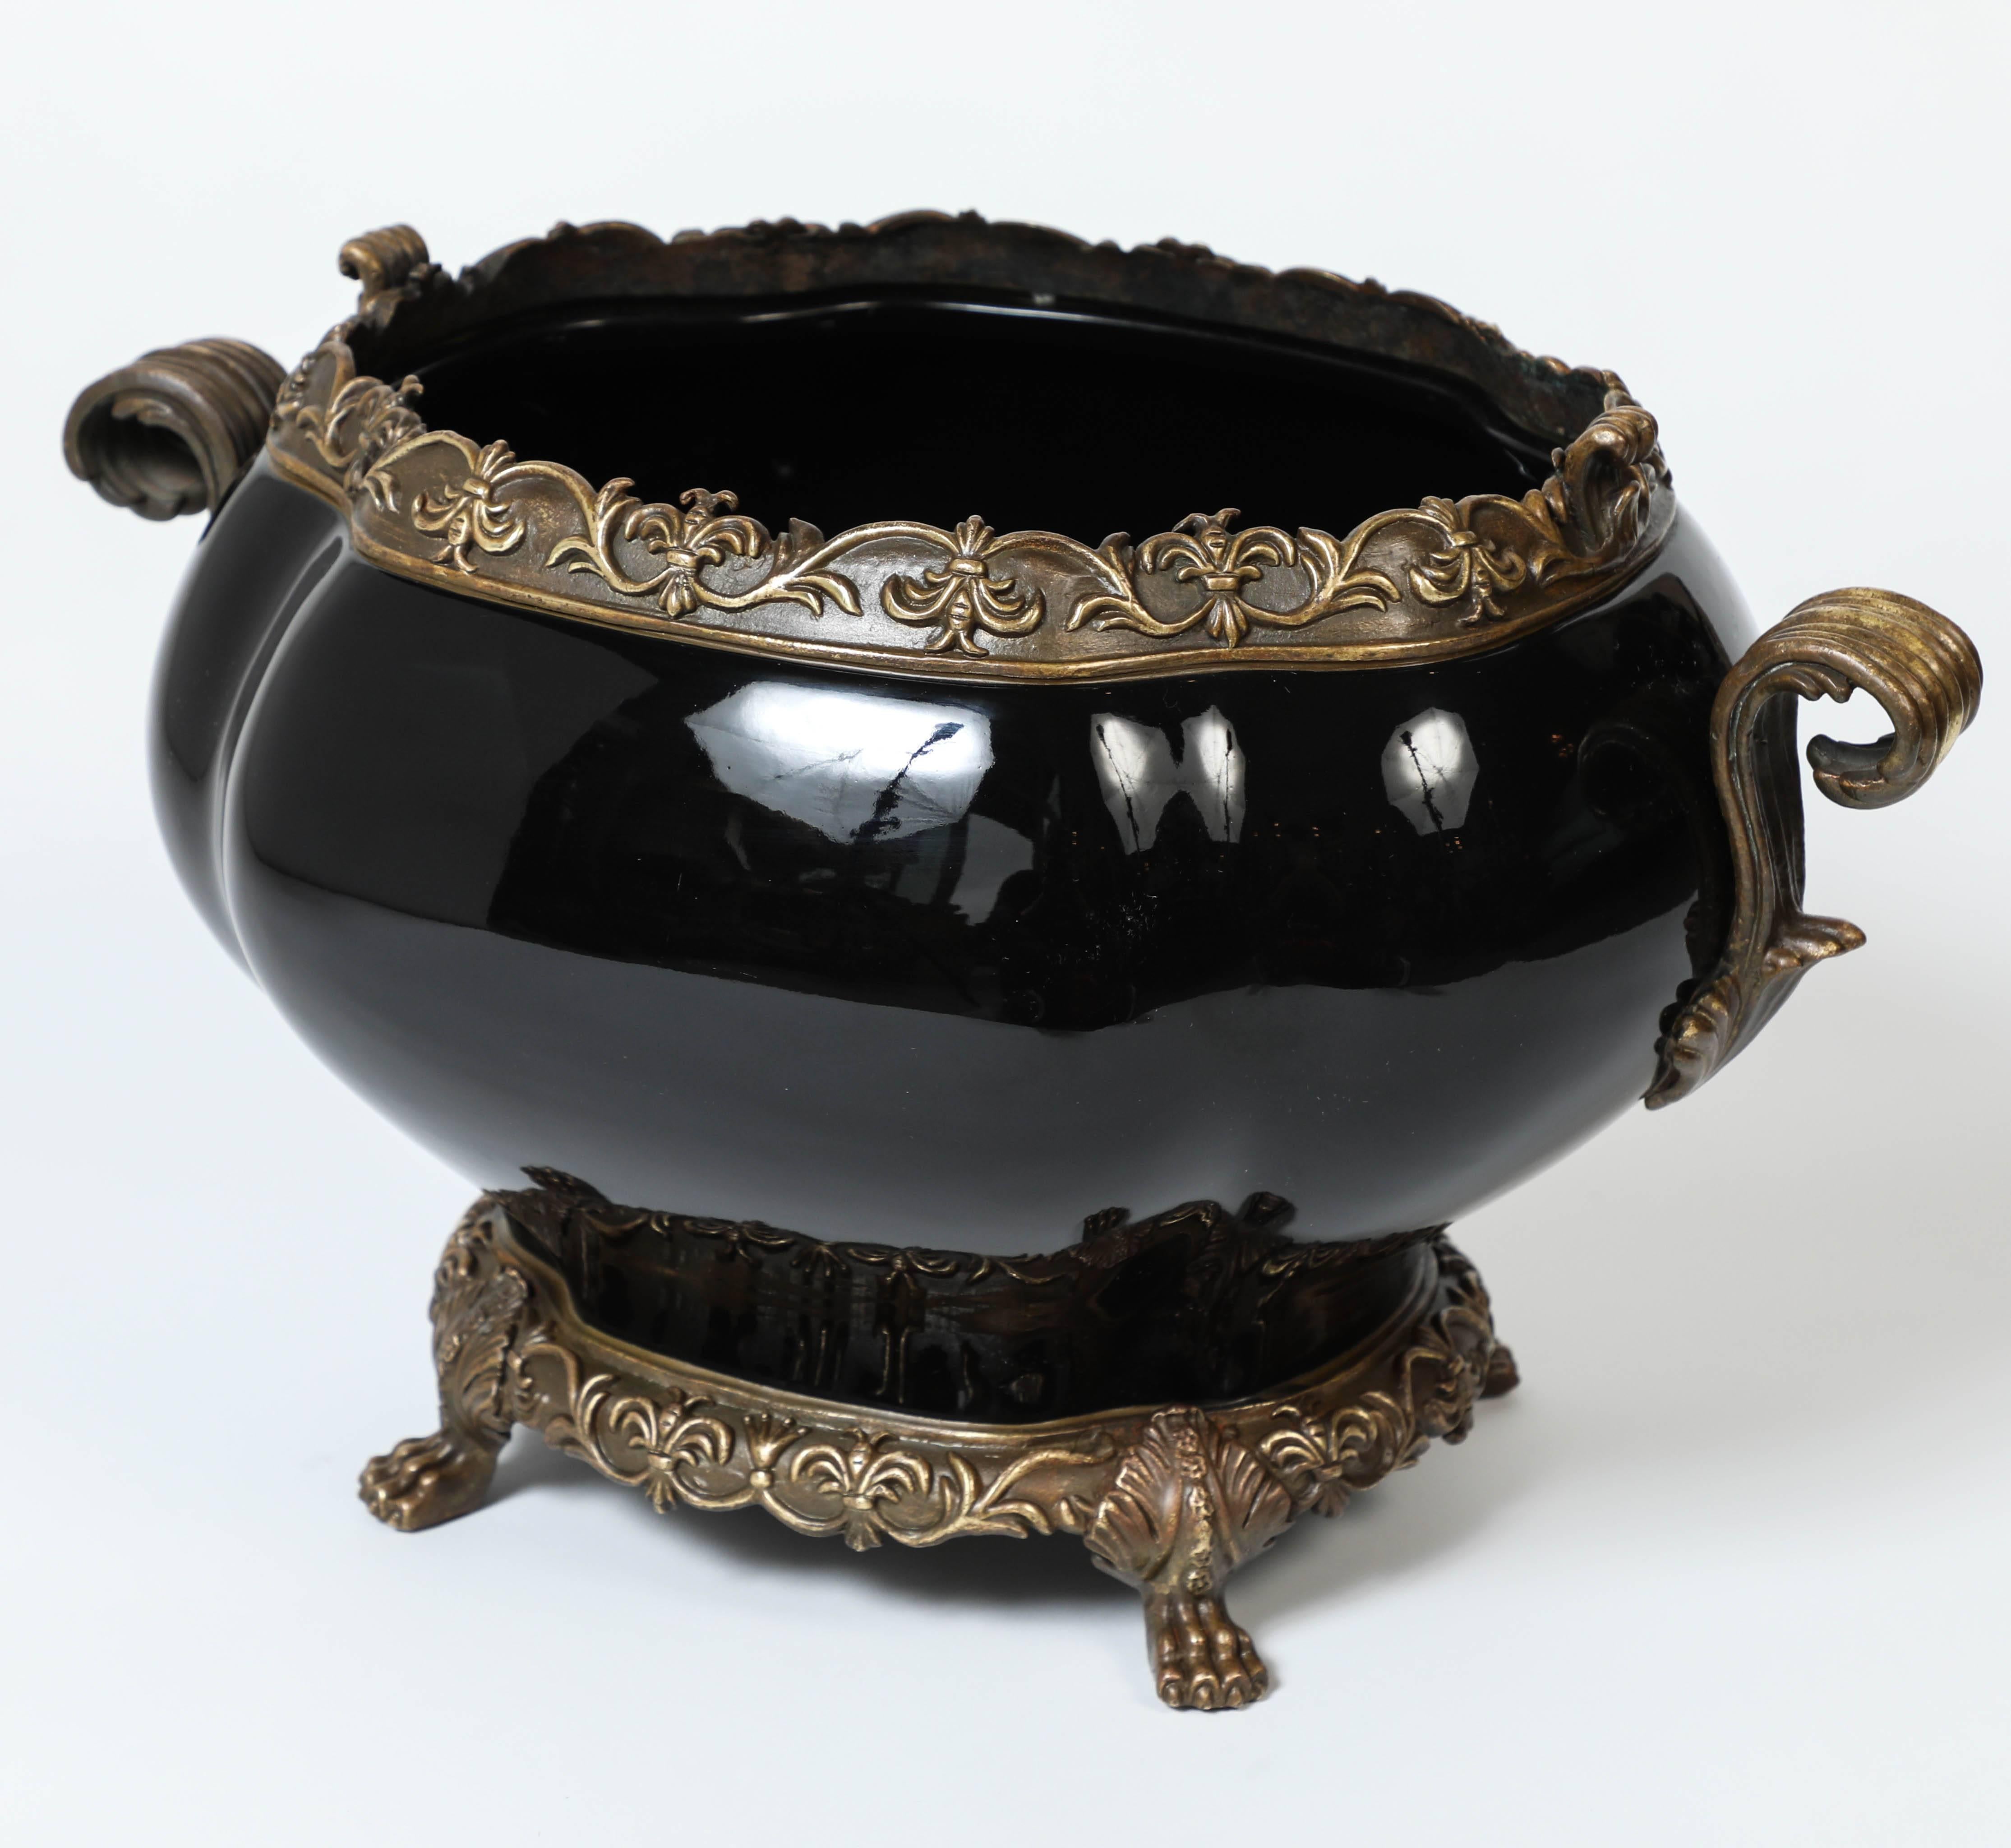 Vintage Black Ceramic and Claw-Footed Compote / Tureen 2